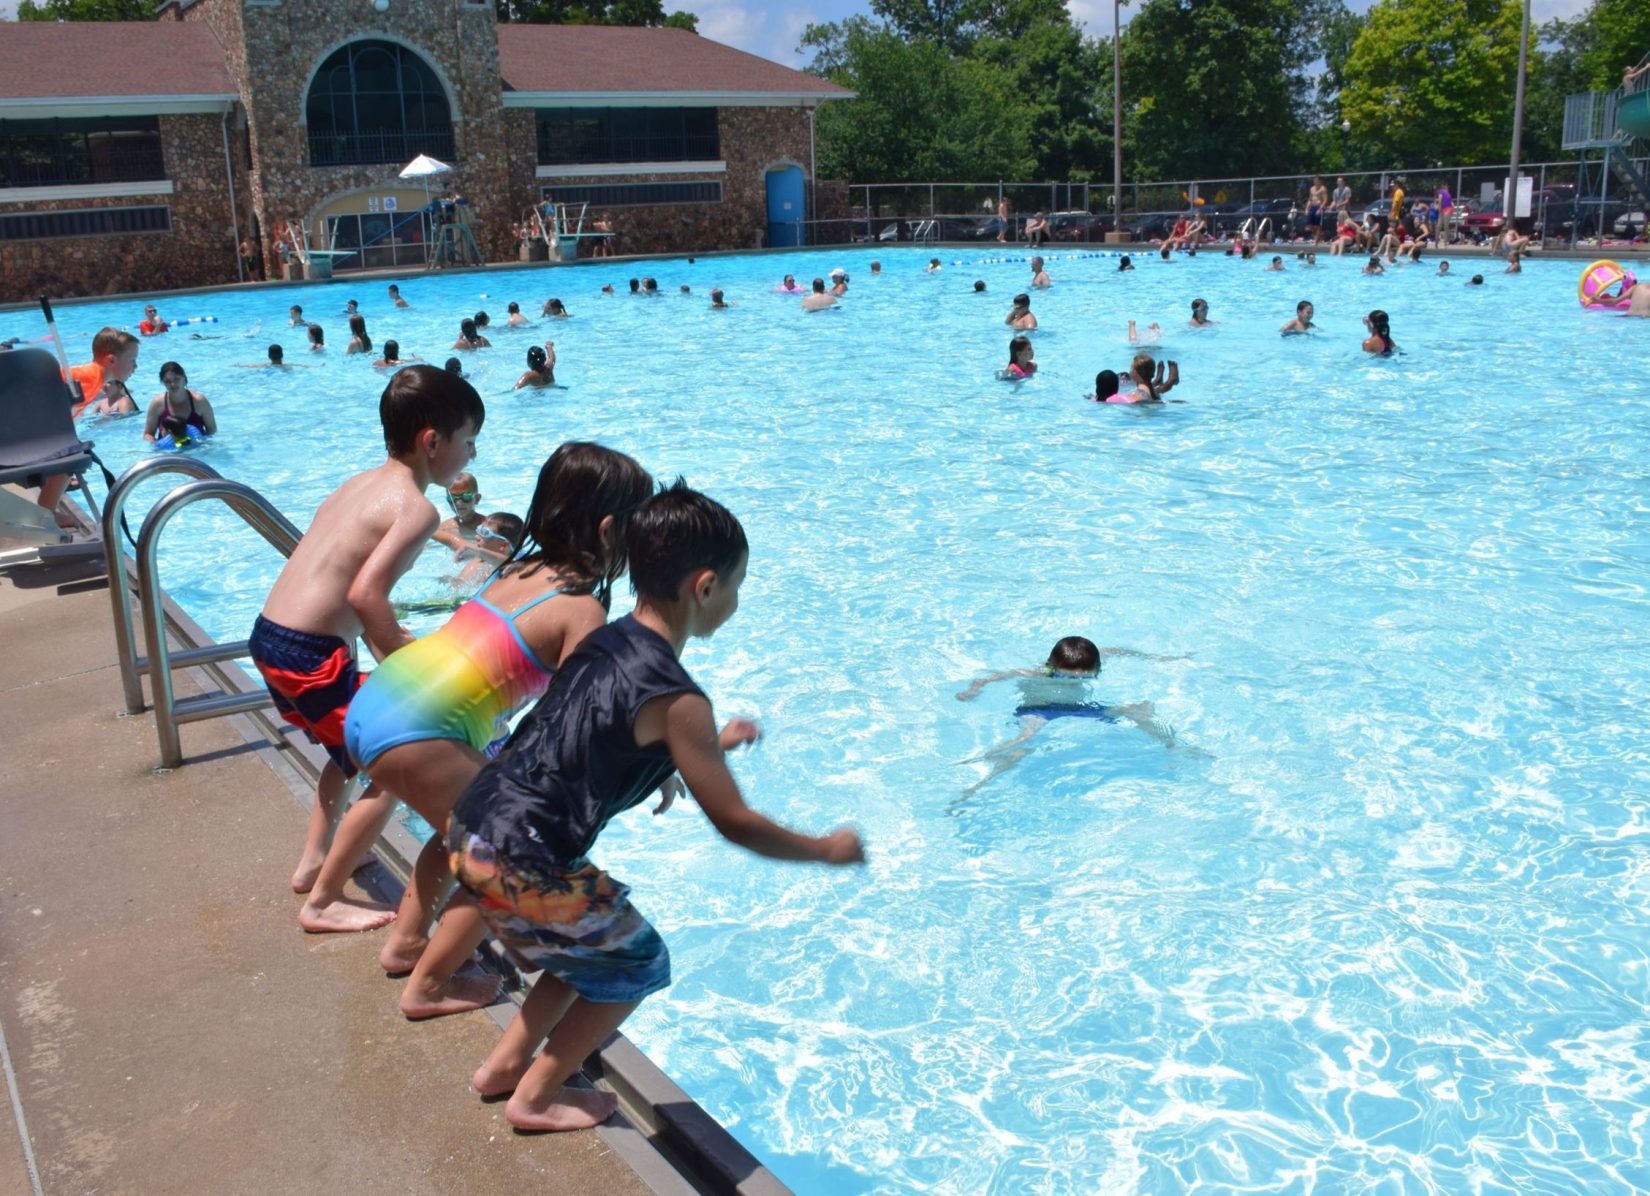 Heat advisory extends pool hours, opens cooling centers